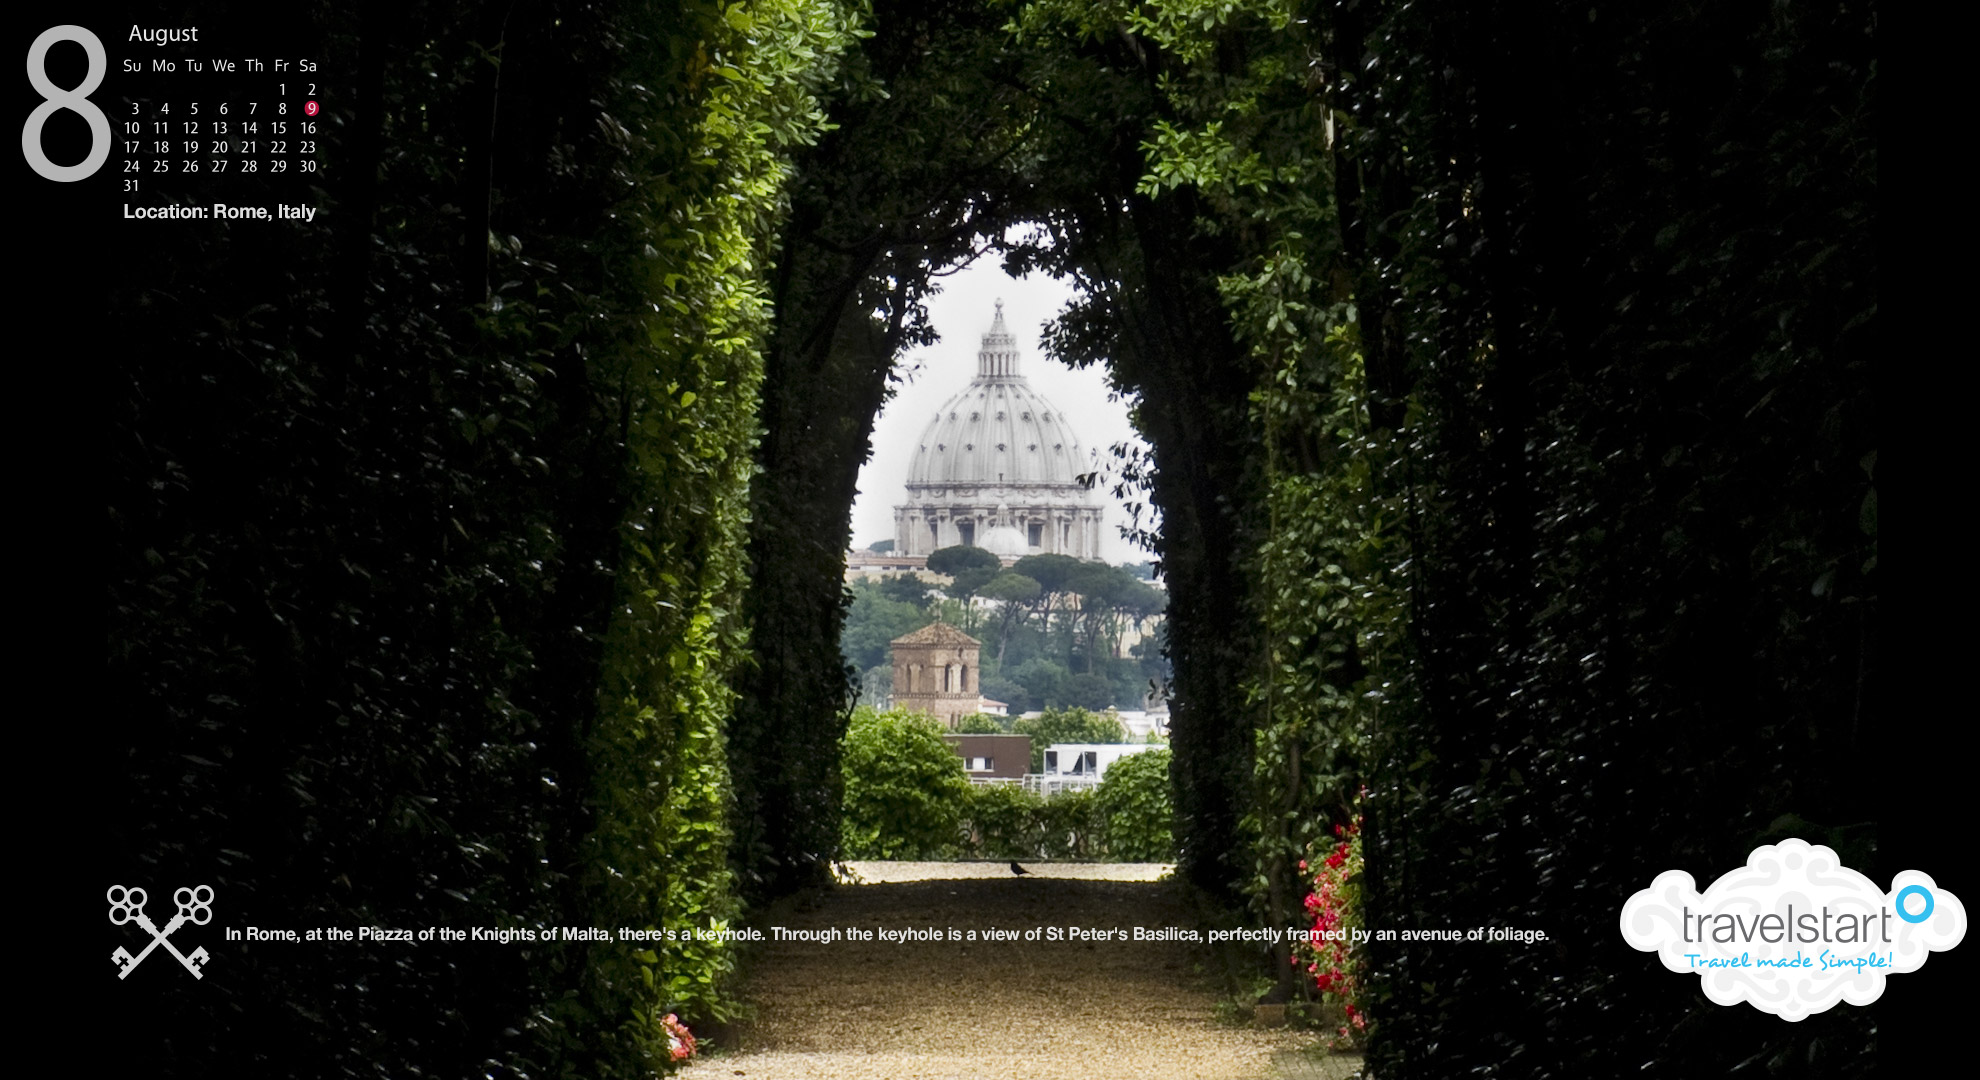 Download your free August 2014 wallpaper calendar featuring the Rome keyhole view.